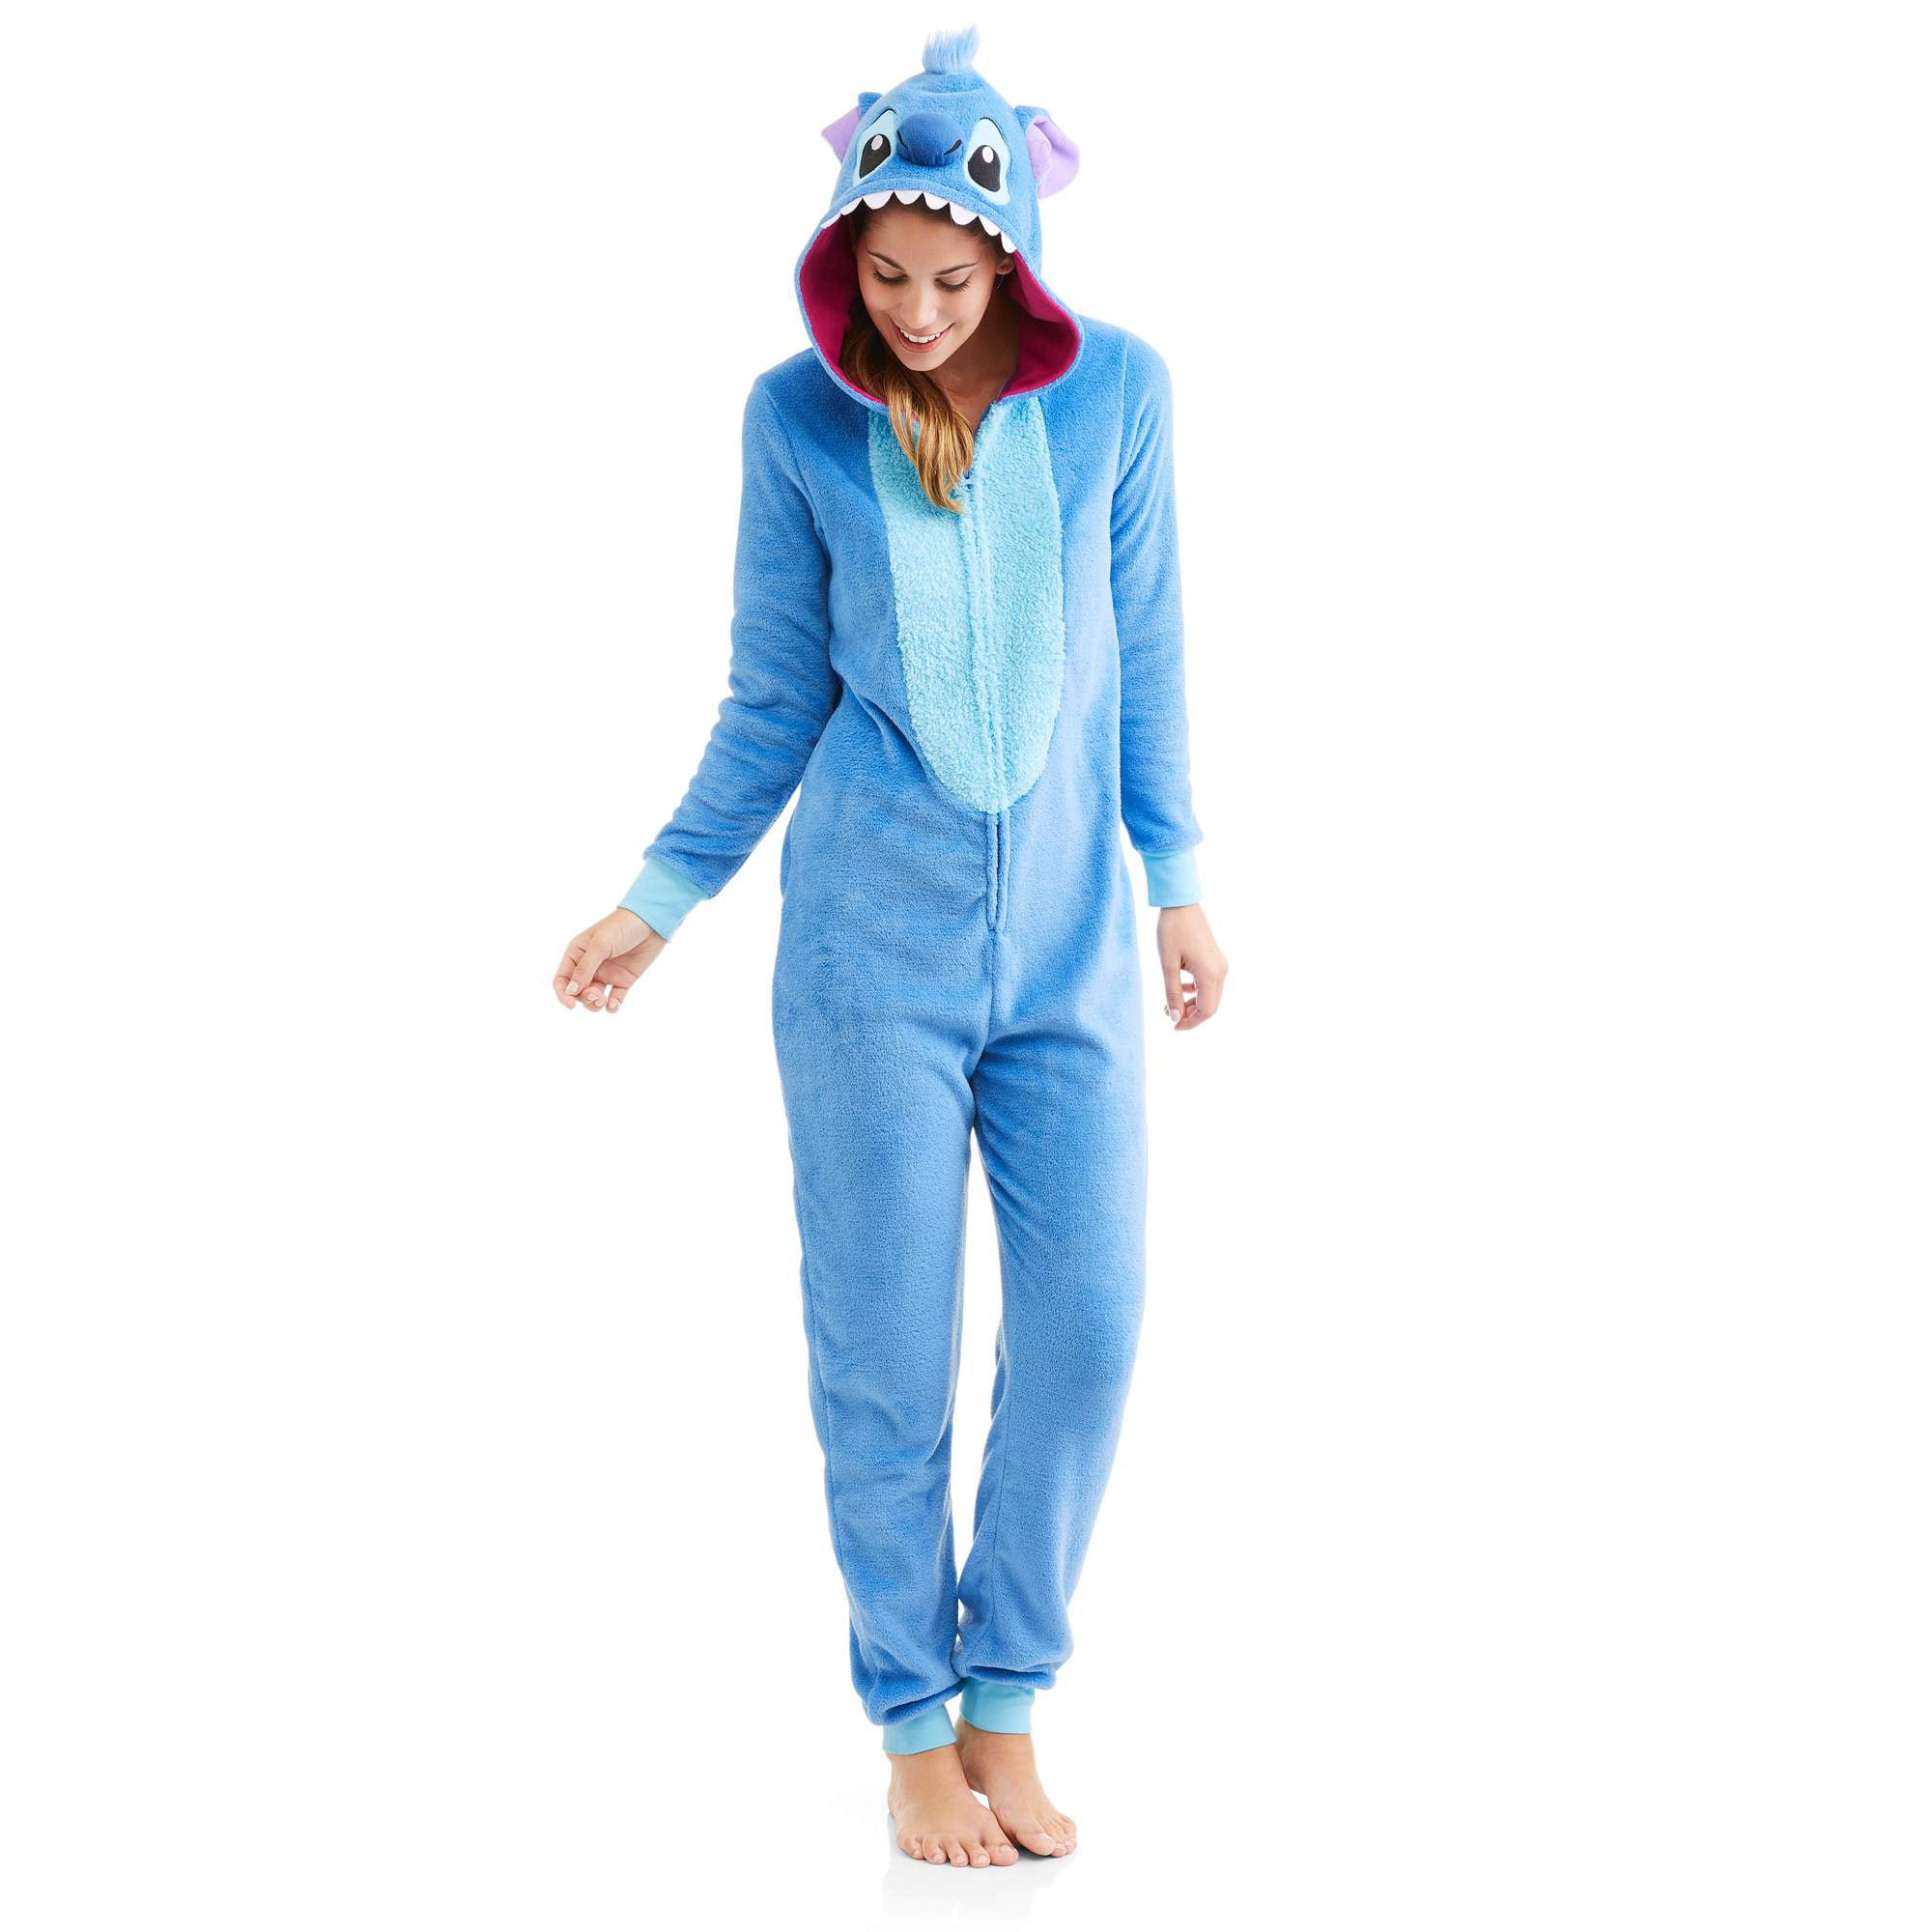 Disney Women's One Piece Pajama Set Union Suit Sleepwear, Step In and Zip  It Up — That's All That's Required From These Disney Halloween Onesies